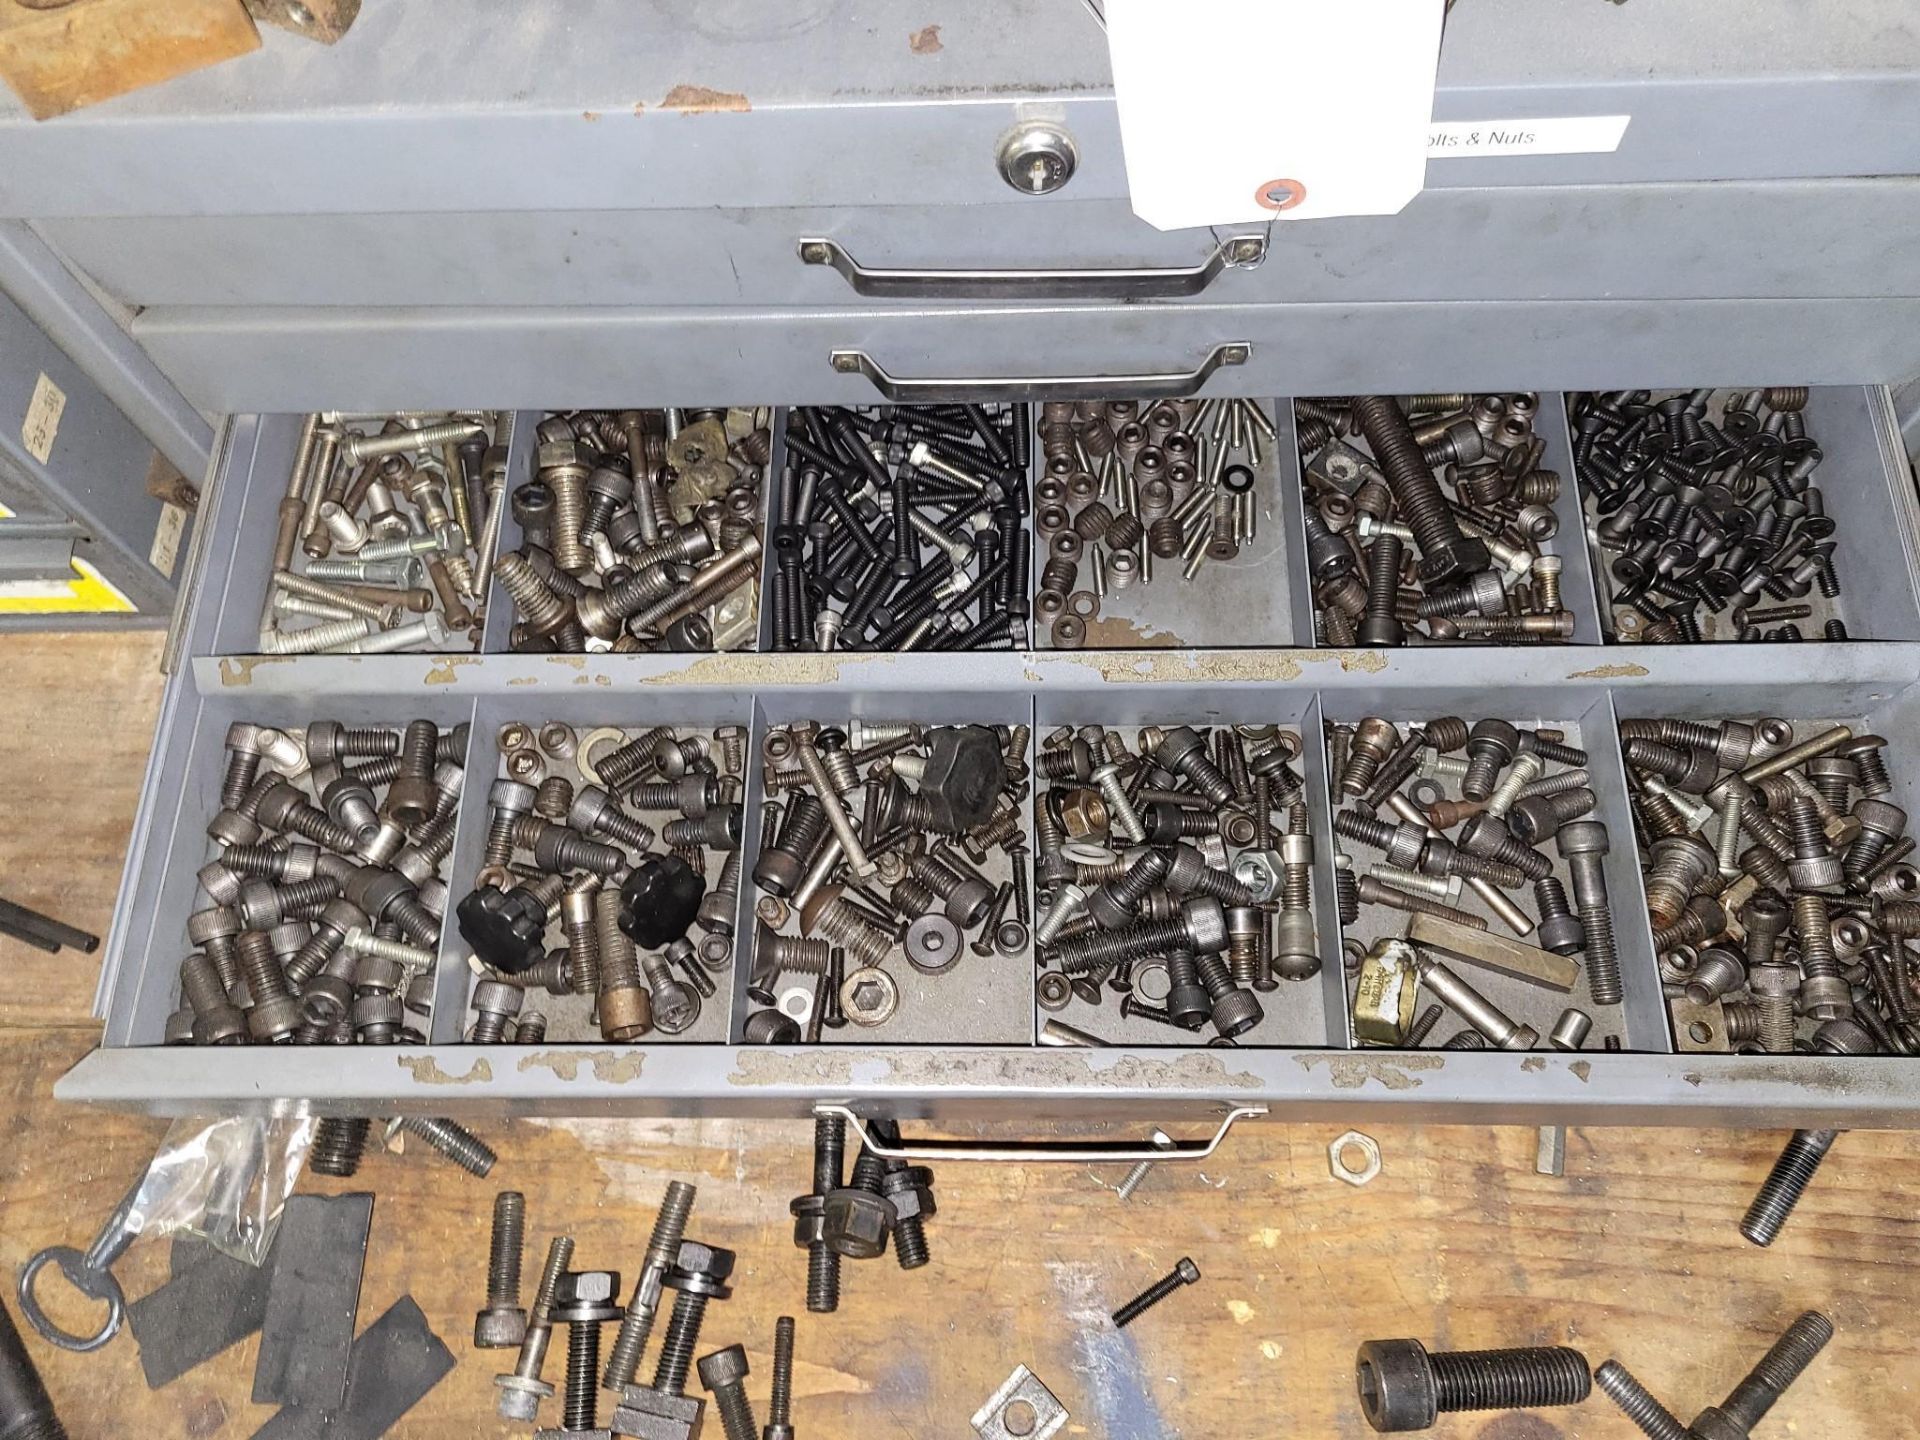 LARGE LOT OF MILLING TOOLS, TAPS, CARBIDE INSERTS, SETUP HARDWARE AND HAND TOOLS - Image 19 of 24